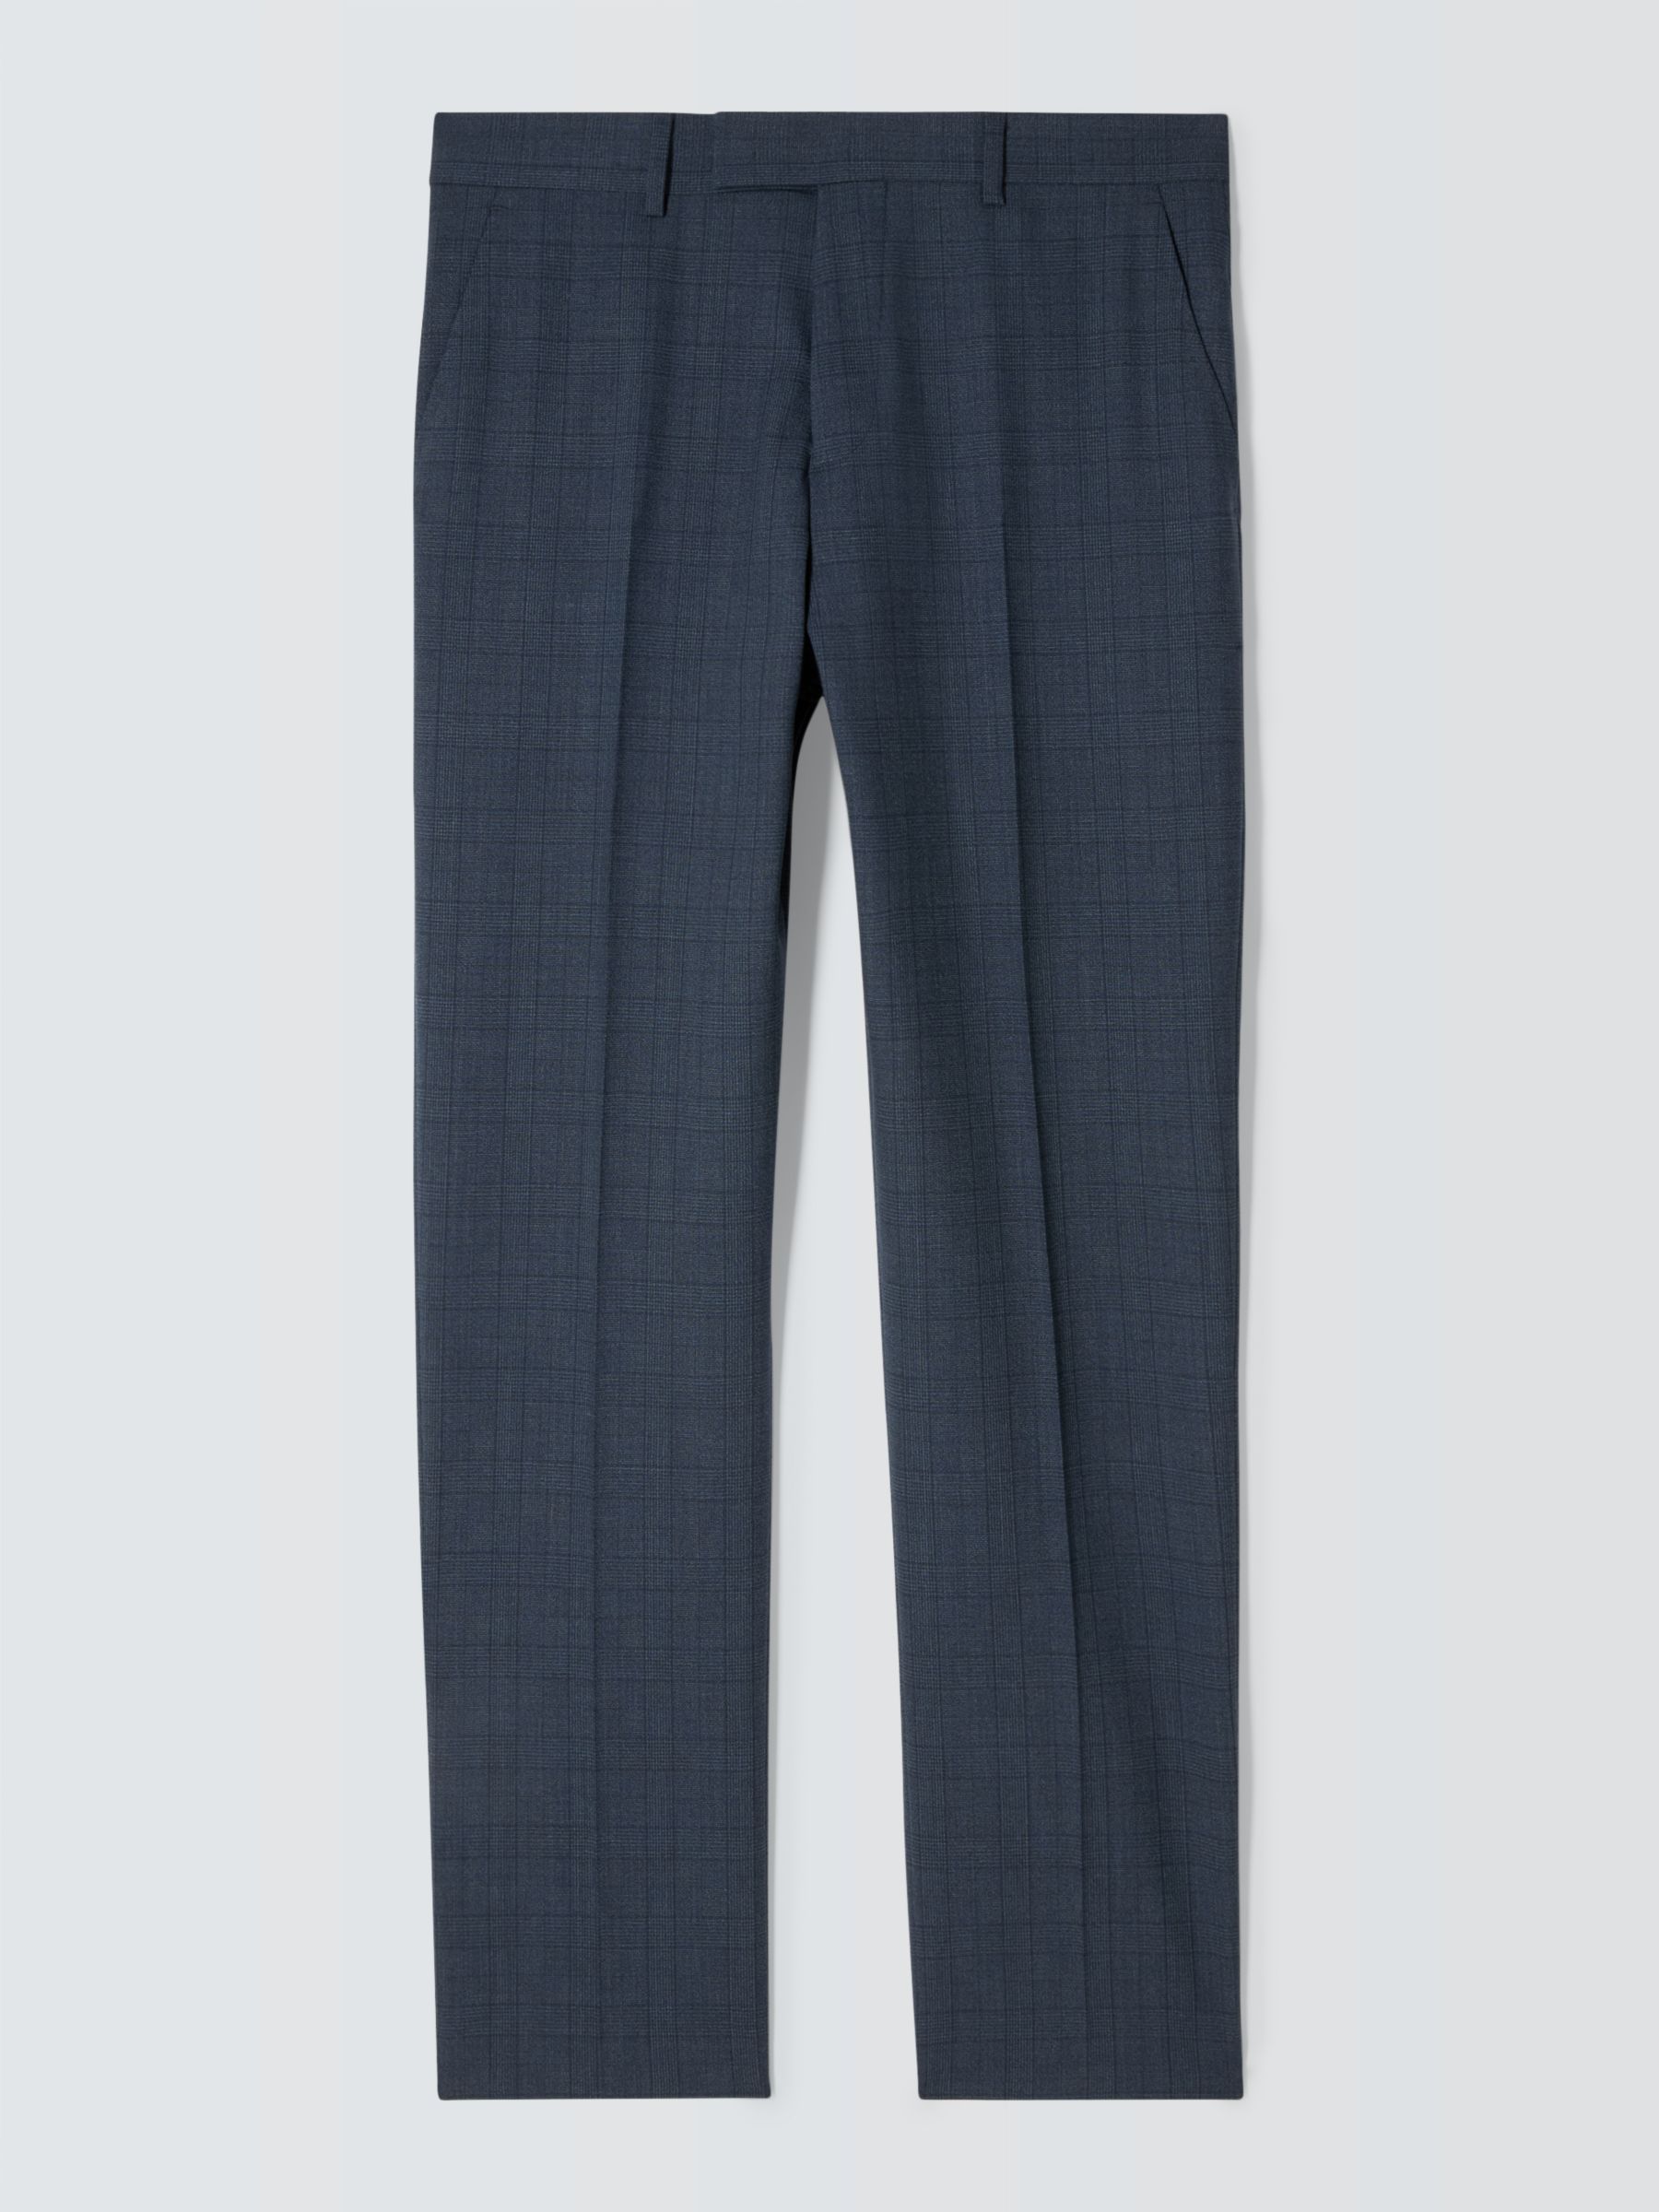 John Lewis Culford Regular Fit Check Wool Suit Trousers, Navy, 34S